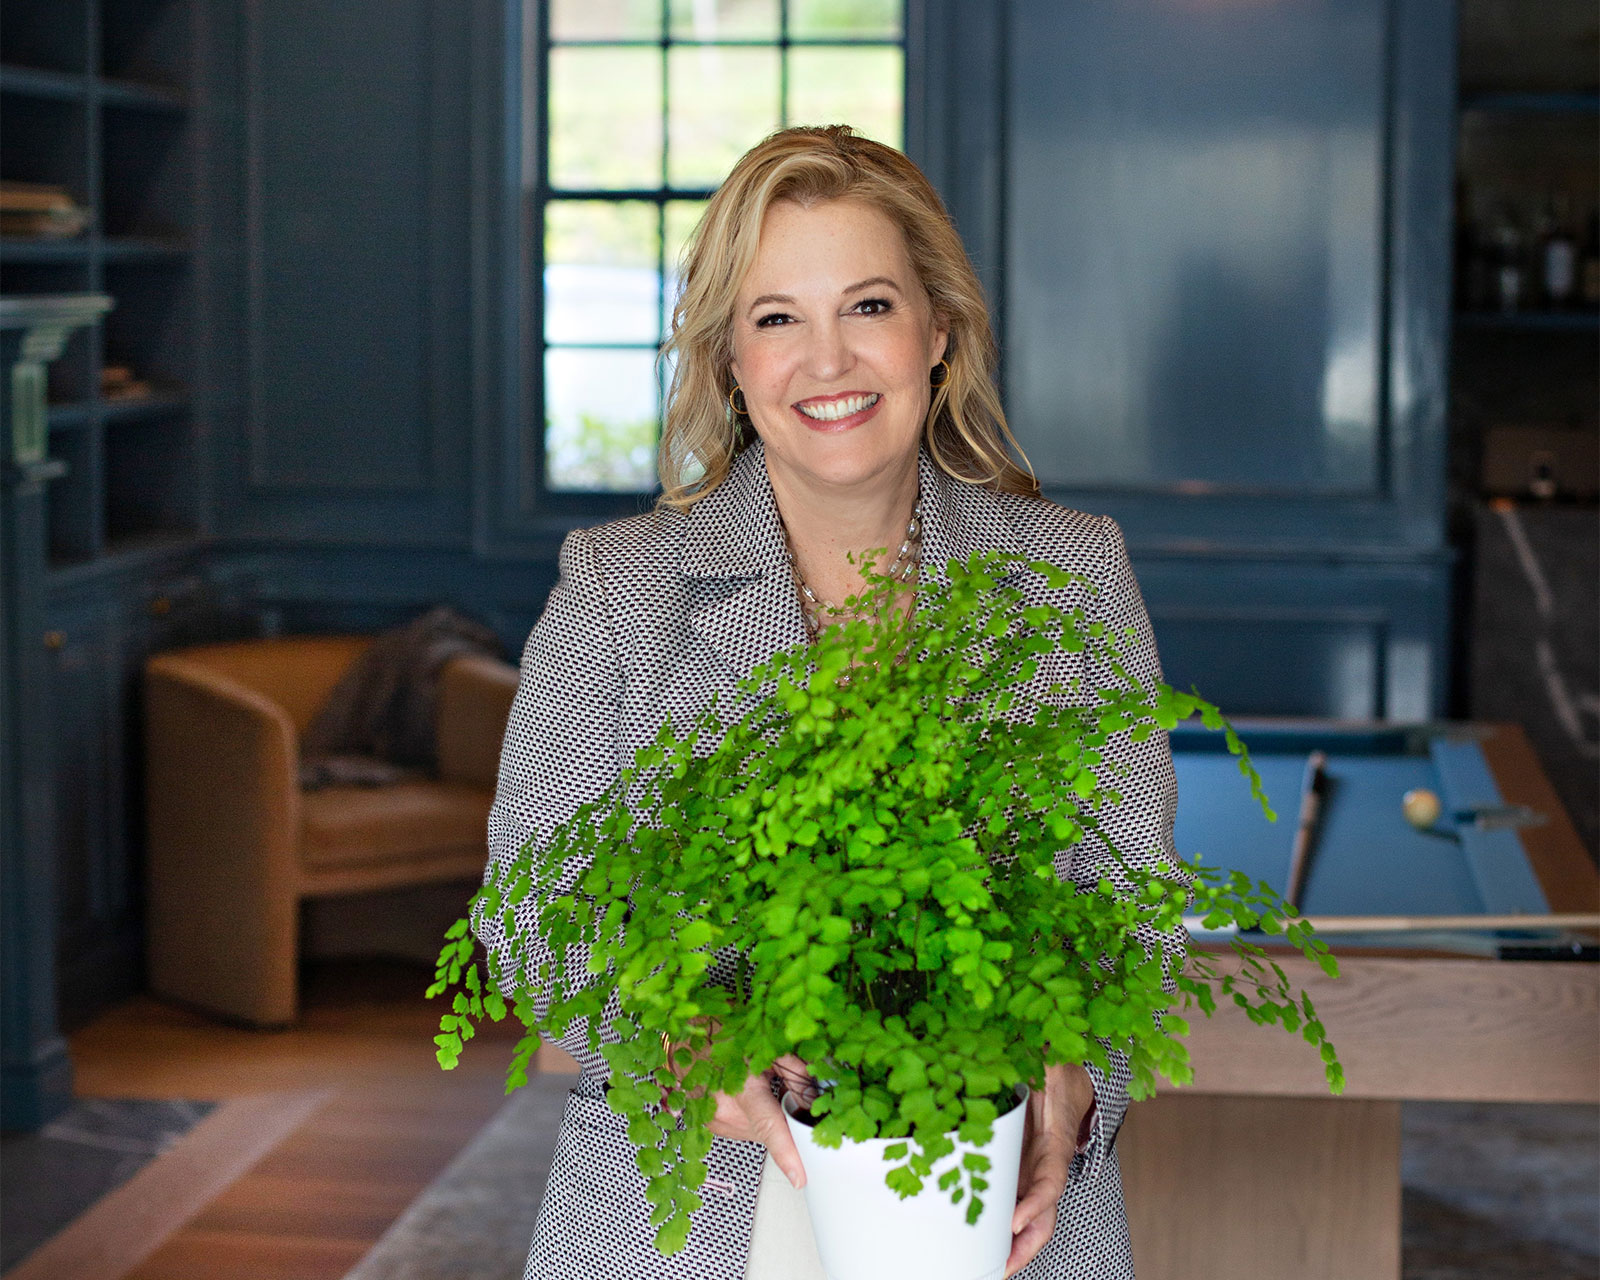 Cindi holding a fern in a house she is staging to sell